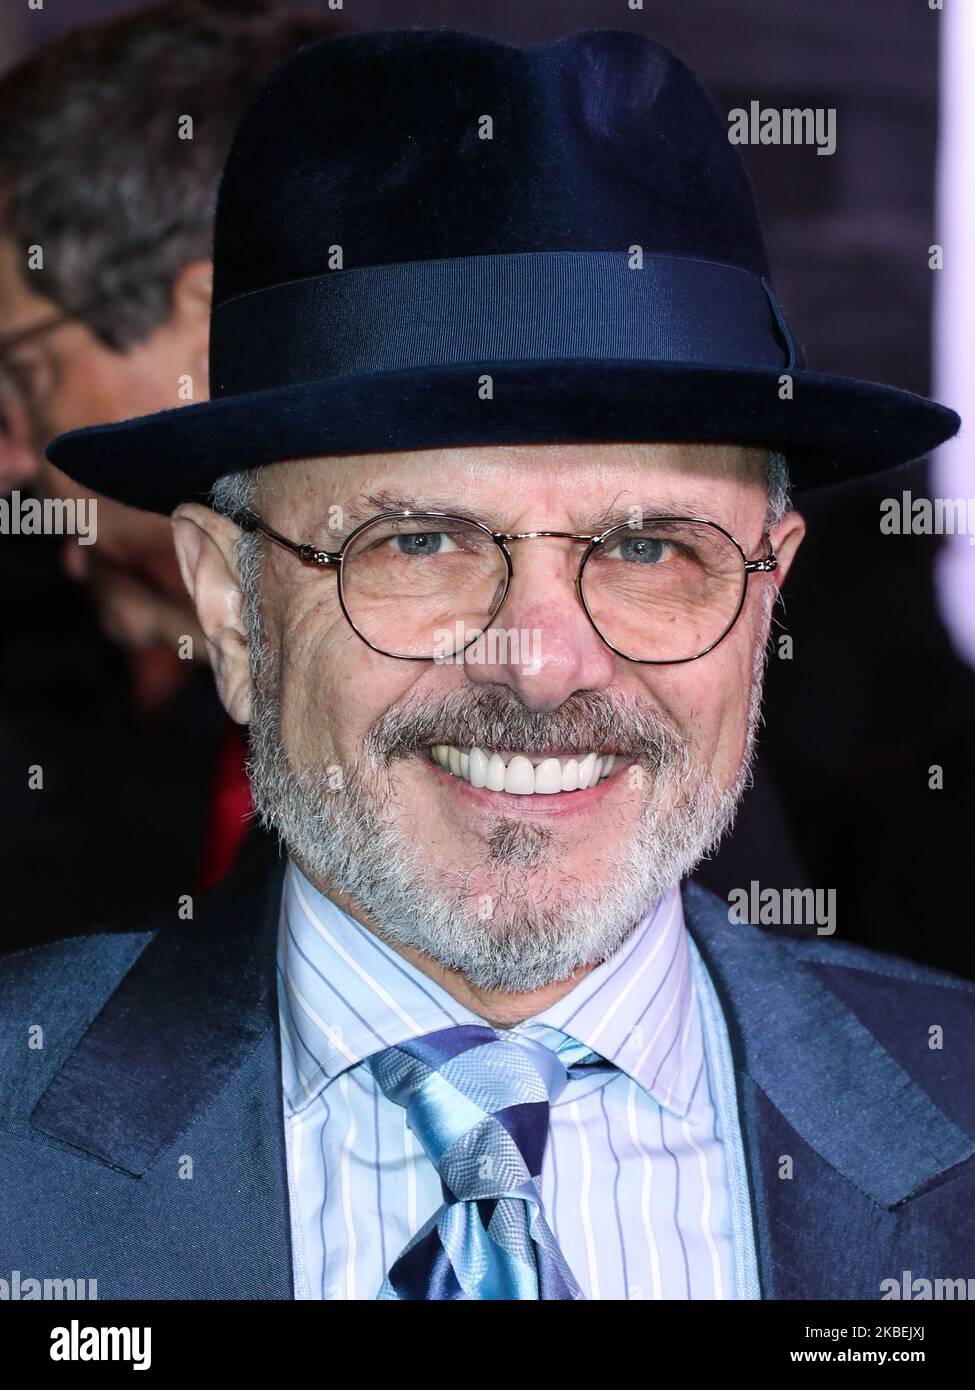 HOLLYWOOD, LOS ANGELES, CALIFORNIA, USA - JANUARY 14: Joe Pantoliano arrives at the Los Angeles Premiere Of Columbia Pictures' 'Bad Boys For Life' held at the TCL Chinese Theatre IMAX on January 14, 2020 in Hollywood, Los Angeles, California, United States. (Photo by Xavier Collin/Image Press Agency/NurPhoto) Stock Photo